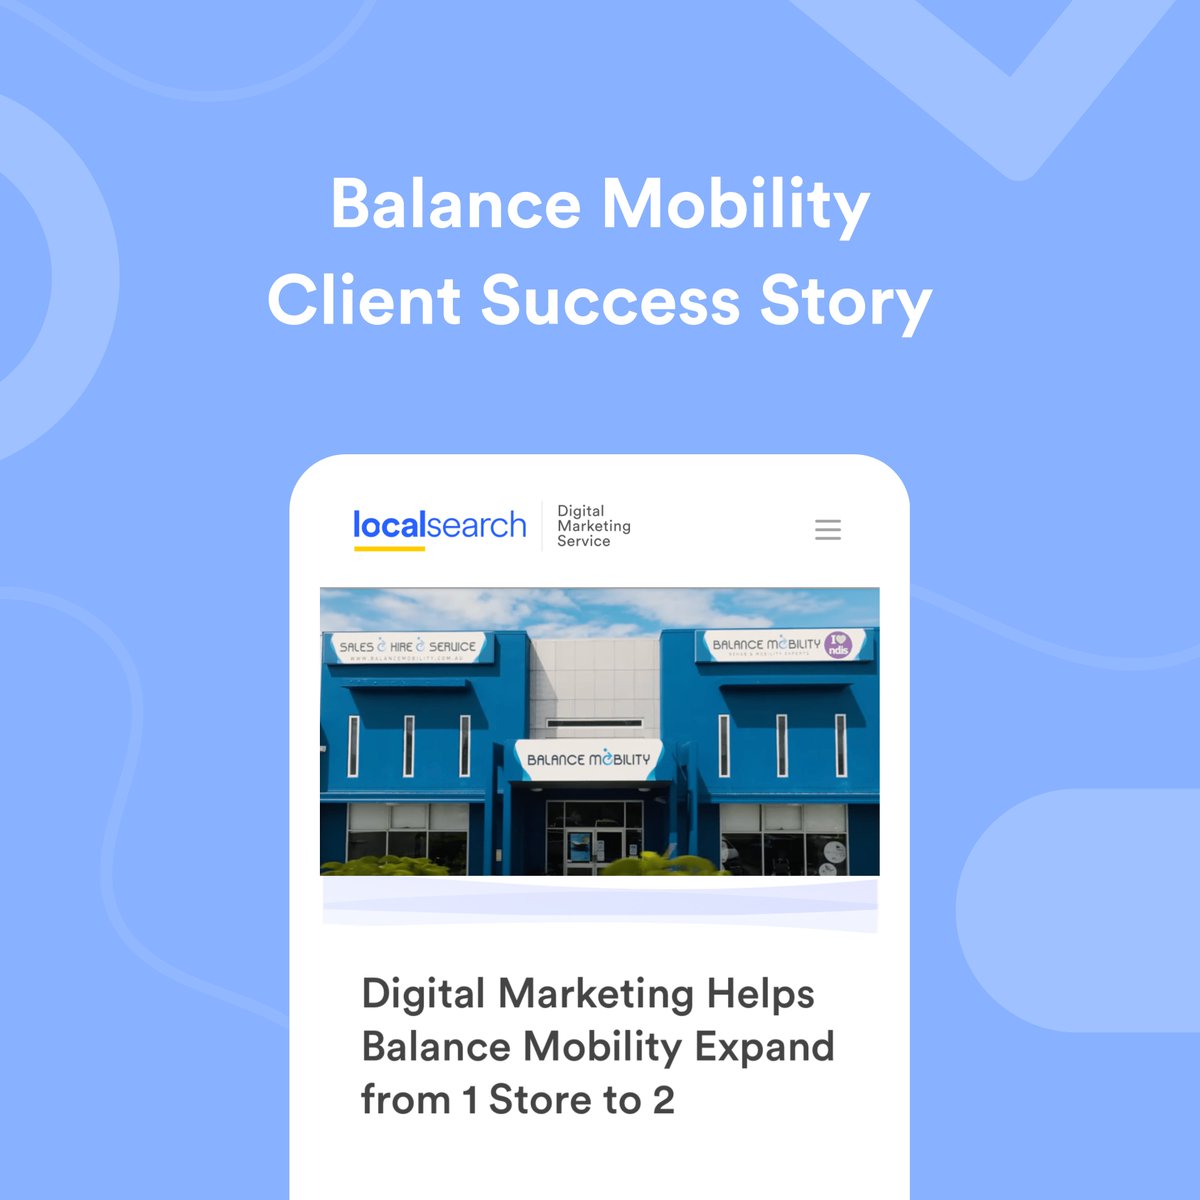 Balance Mobility has expanded from one store to two with the help of digital marketing. They even have a 29% Google Ads conversion rate! 🤯 

Follow the link to find out how we worked with them to achieve this impressive growth: bit.ly/43WMbqw